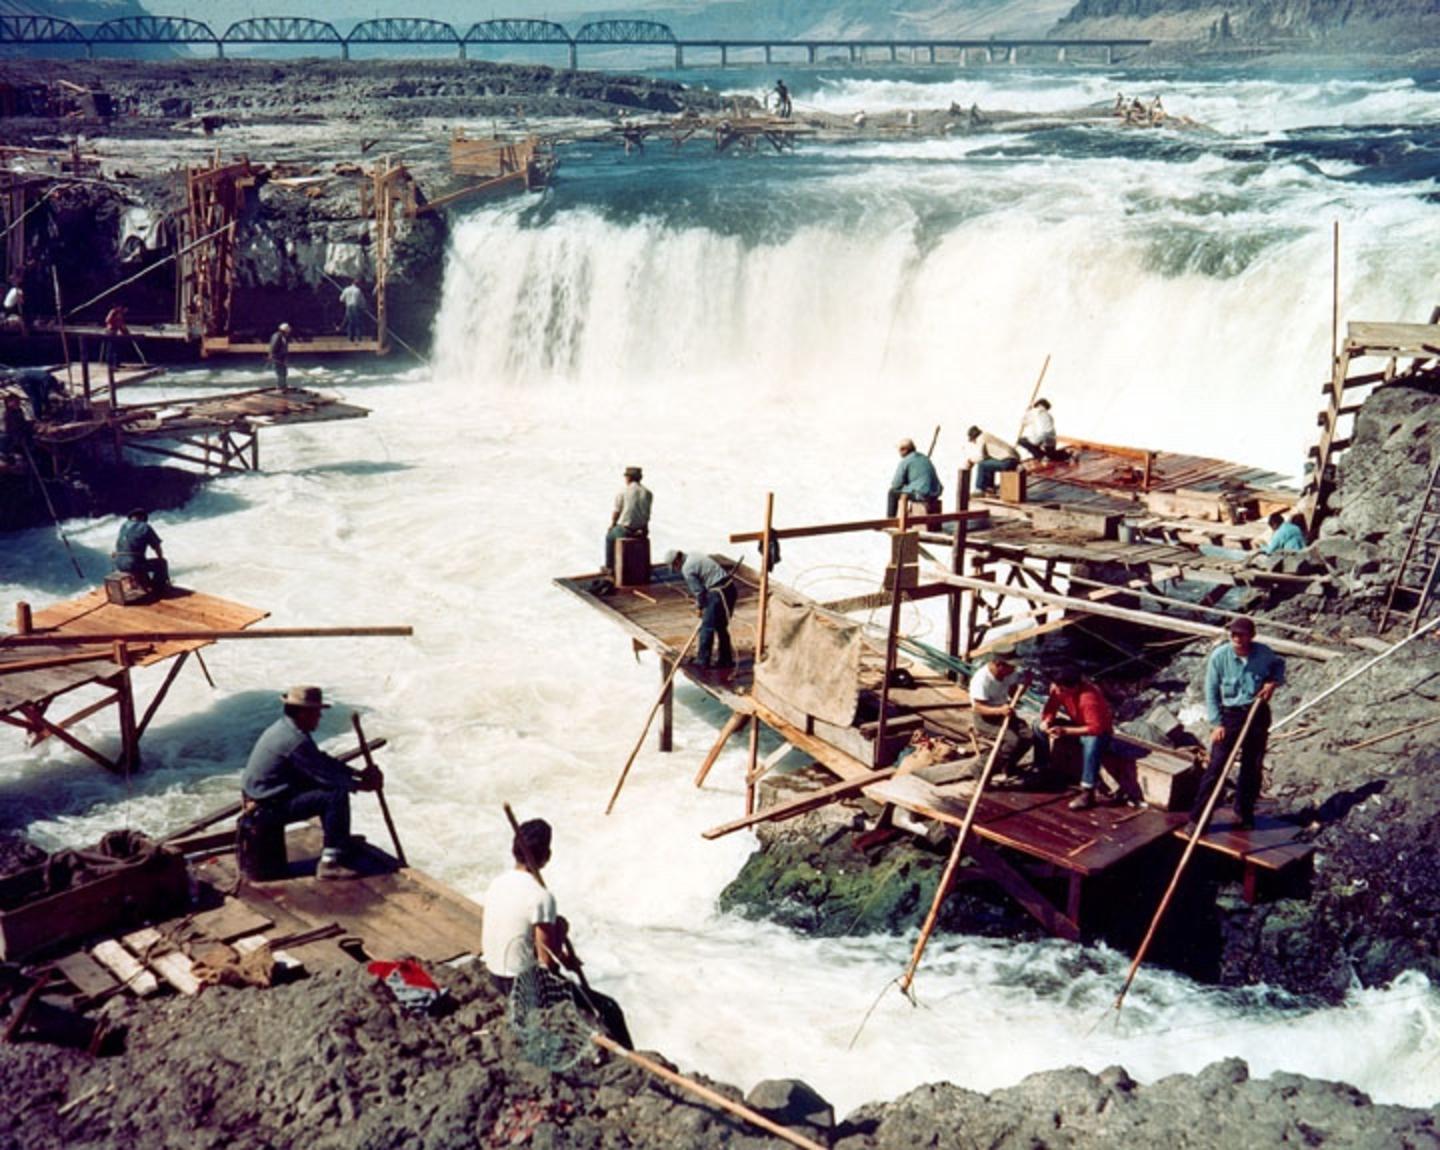 Indigenous people dipnet fishing for salmon at the Cul-De-Sac of Celilo Falls on the Columbia River in the mid 1950s, just prior to completion of the dam known as The Dallas. The resulting reservoir submerged the falls and the dam blocked fish passage. Evidence shows that native people converged upon Celilo going back 15,000 years. in 1805, Lewis &amp; Clark in their journals noted the huge gathering of people there to harvest fish, observing it was the largest they had seen on their journey. Photo courtesy US Army Corps of Engineers.